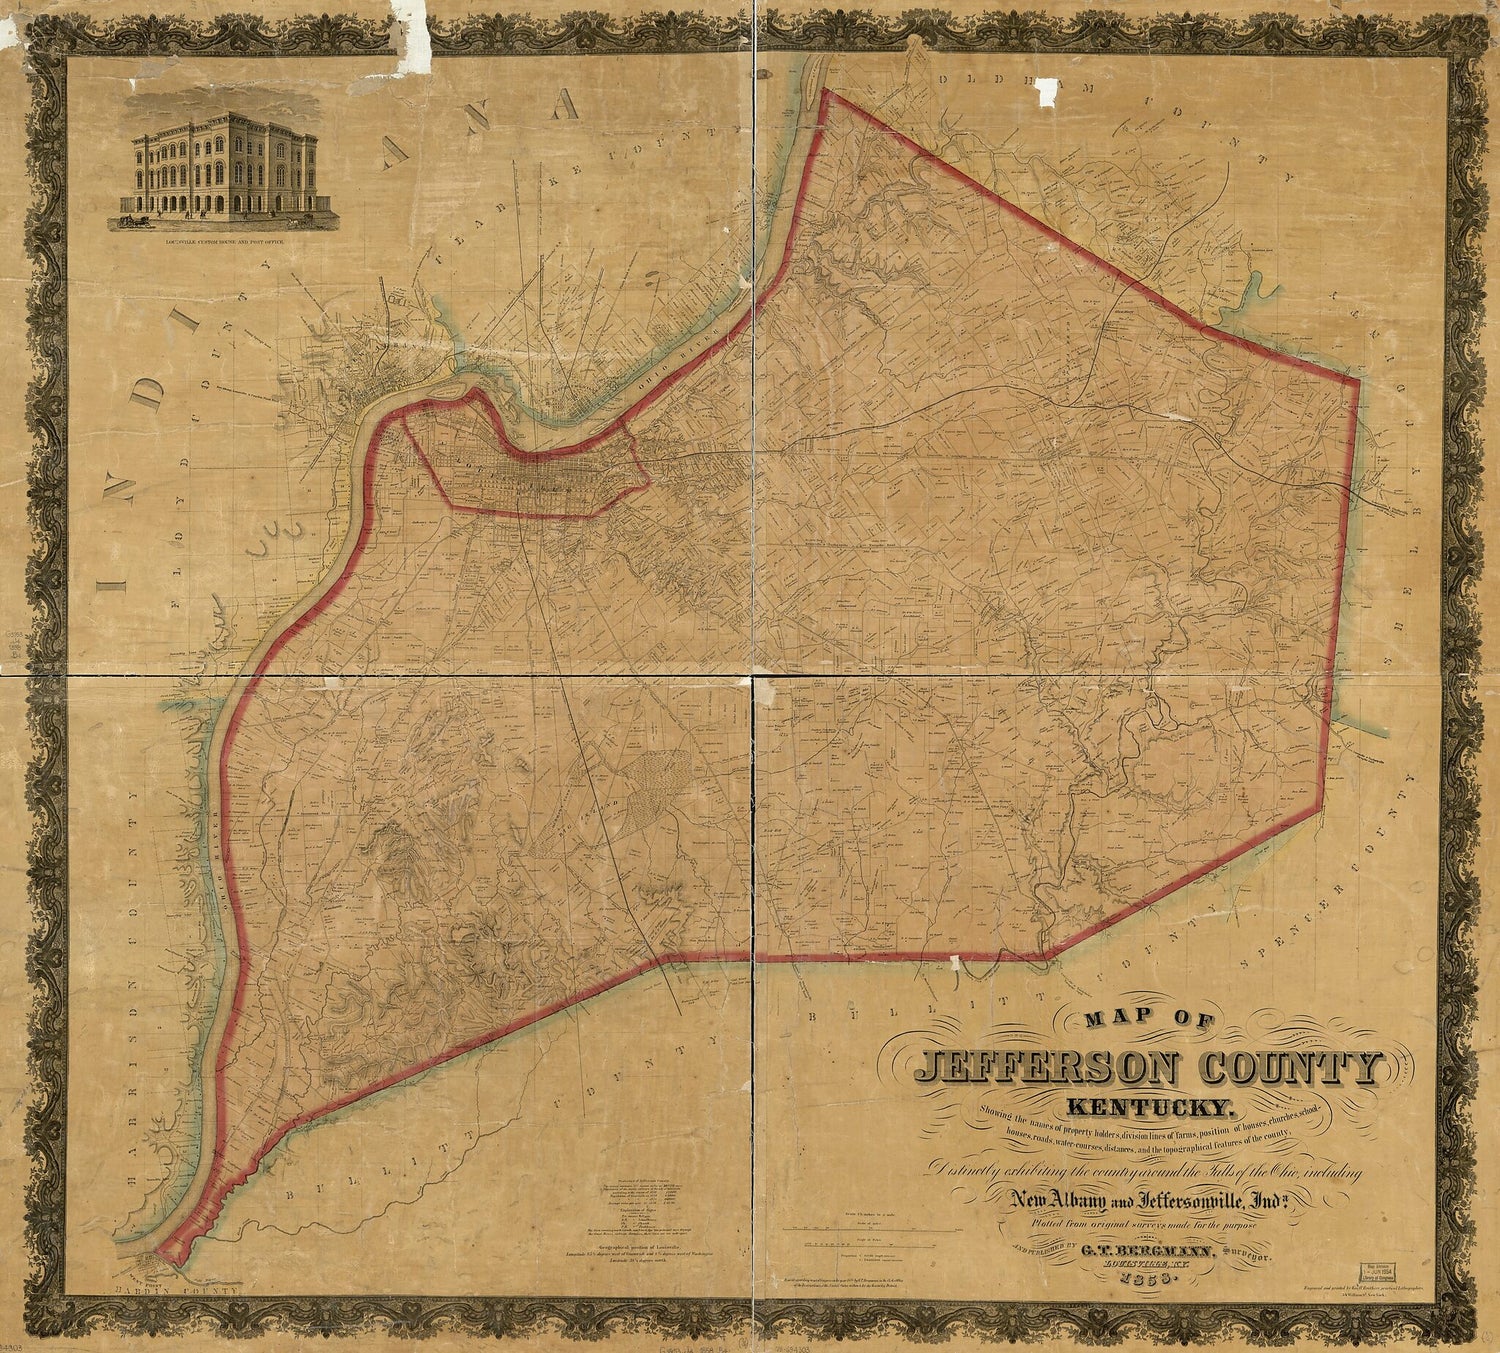 This old map of Houses, Roads, Water-courses, Distances, and the Topographical Features of the County : Distinctly Exhibiting the Country Around the Falls of the Ohio, Including New Albany and Jeffersonville, Inda from 1858 was created by G. T. Bergmann,